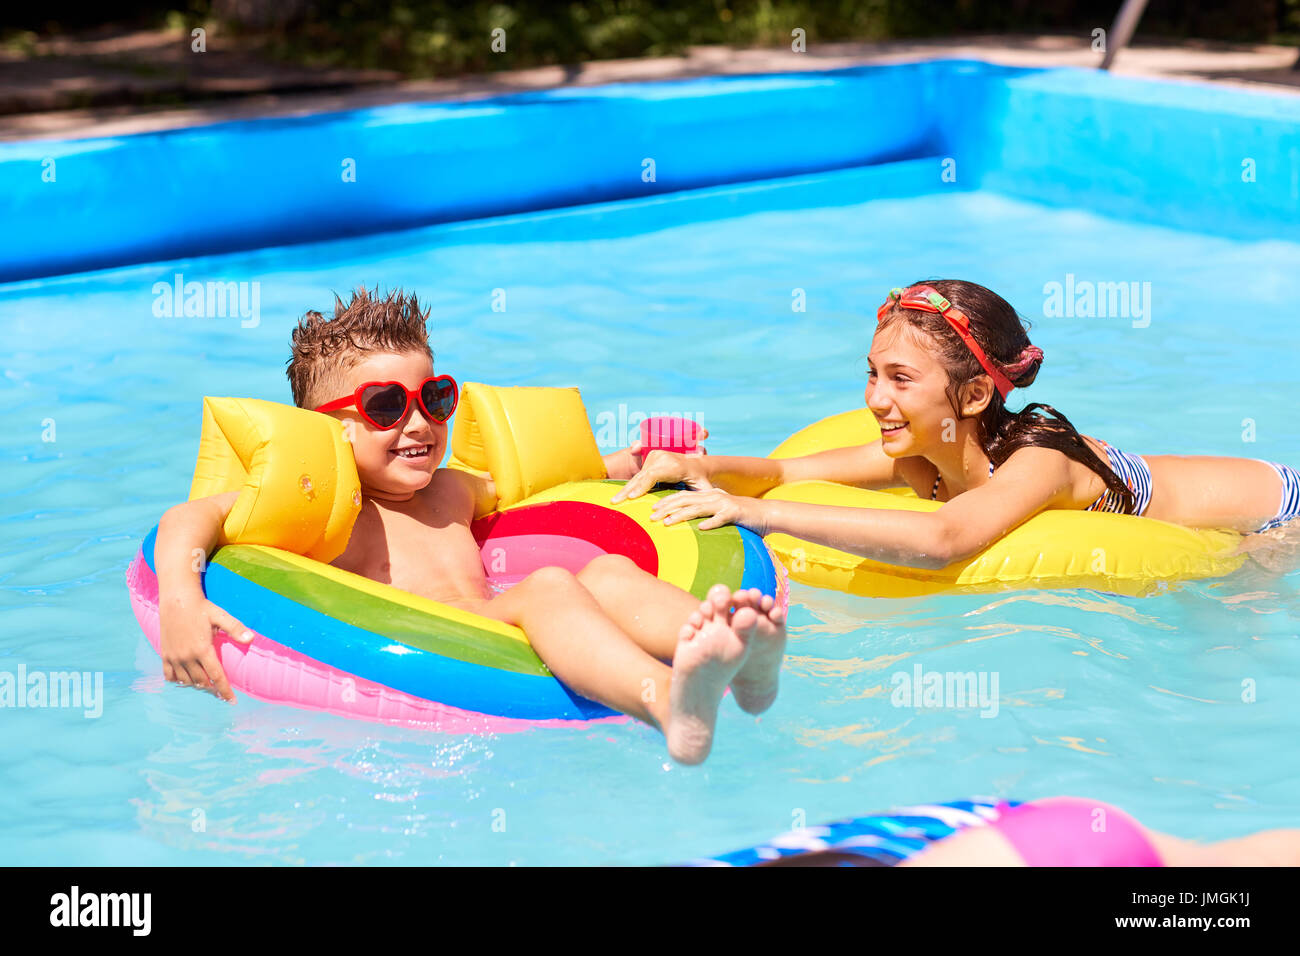 Children in bathing suits play in pool in the summer. Stock Photo